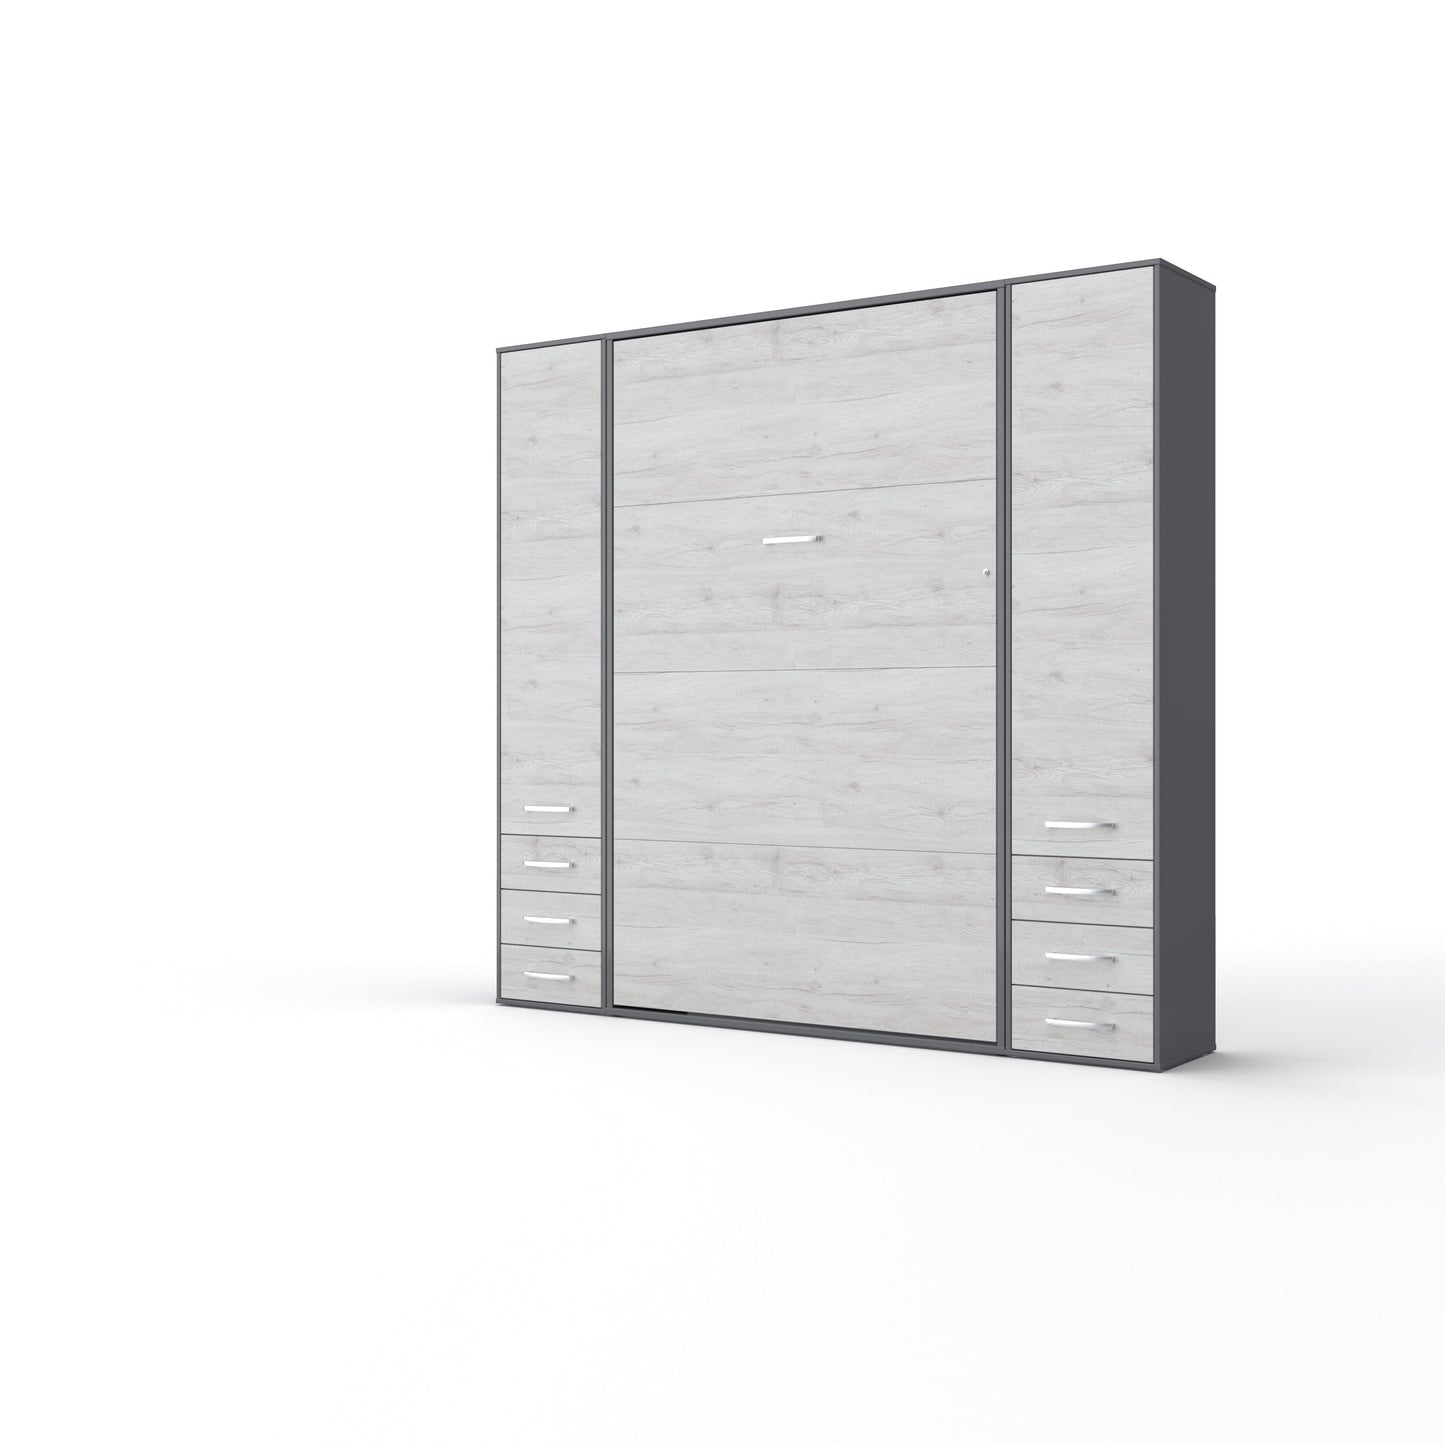 Maxima House Invento Vertical Wall Bed, European Twin Size with 2 cabinets Grey/White Monaco IN90V-07GW